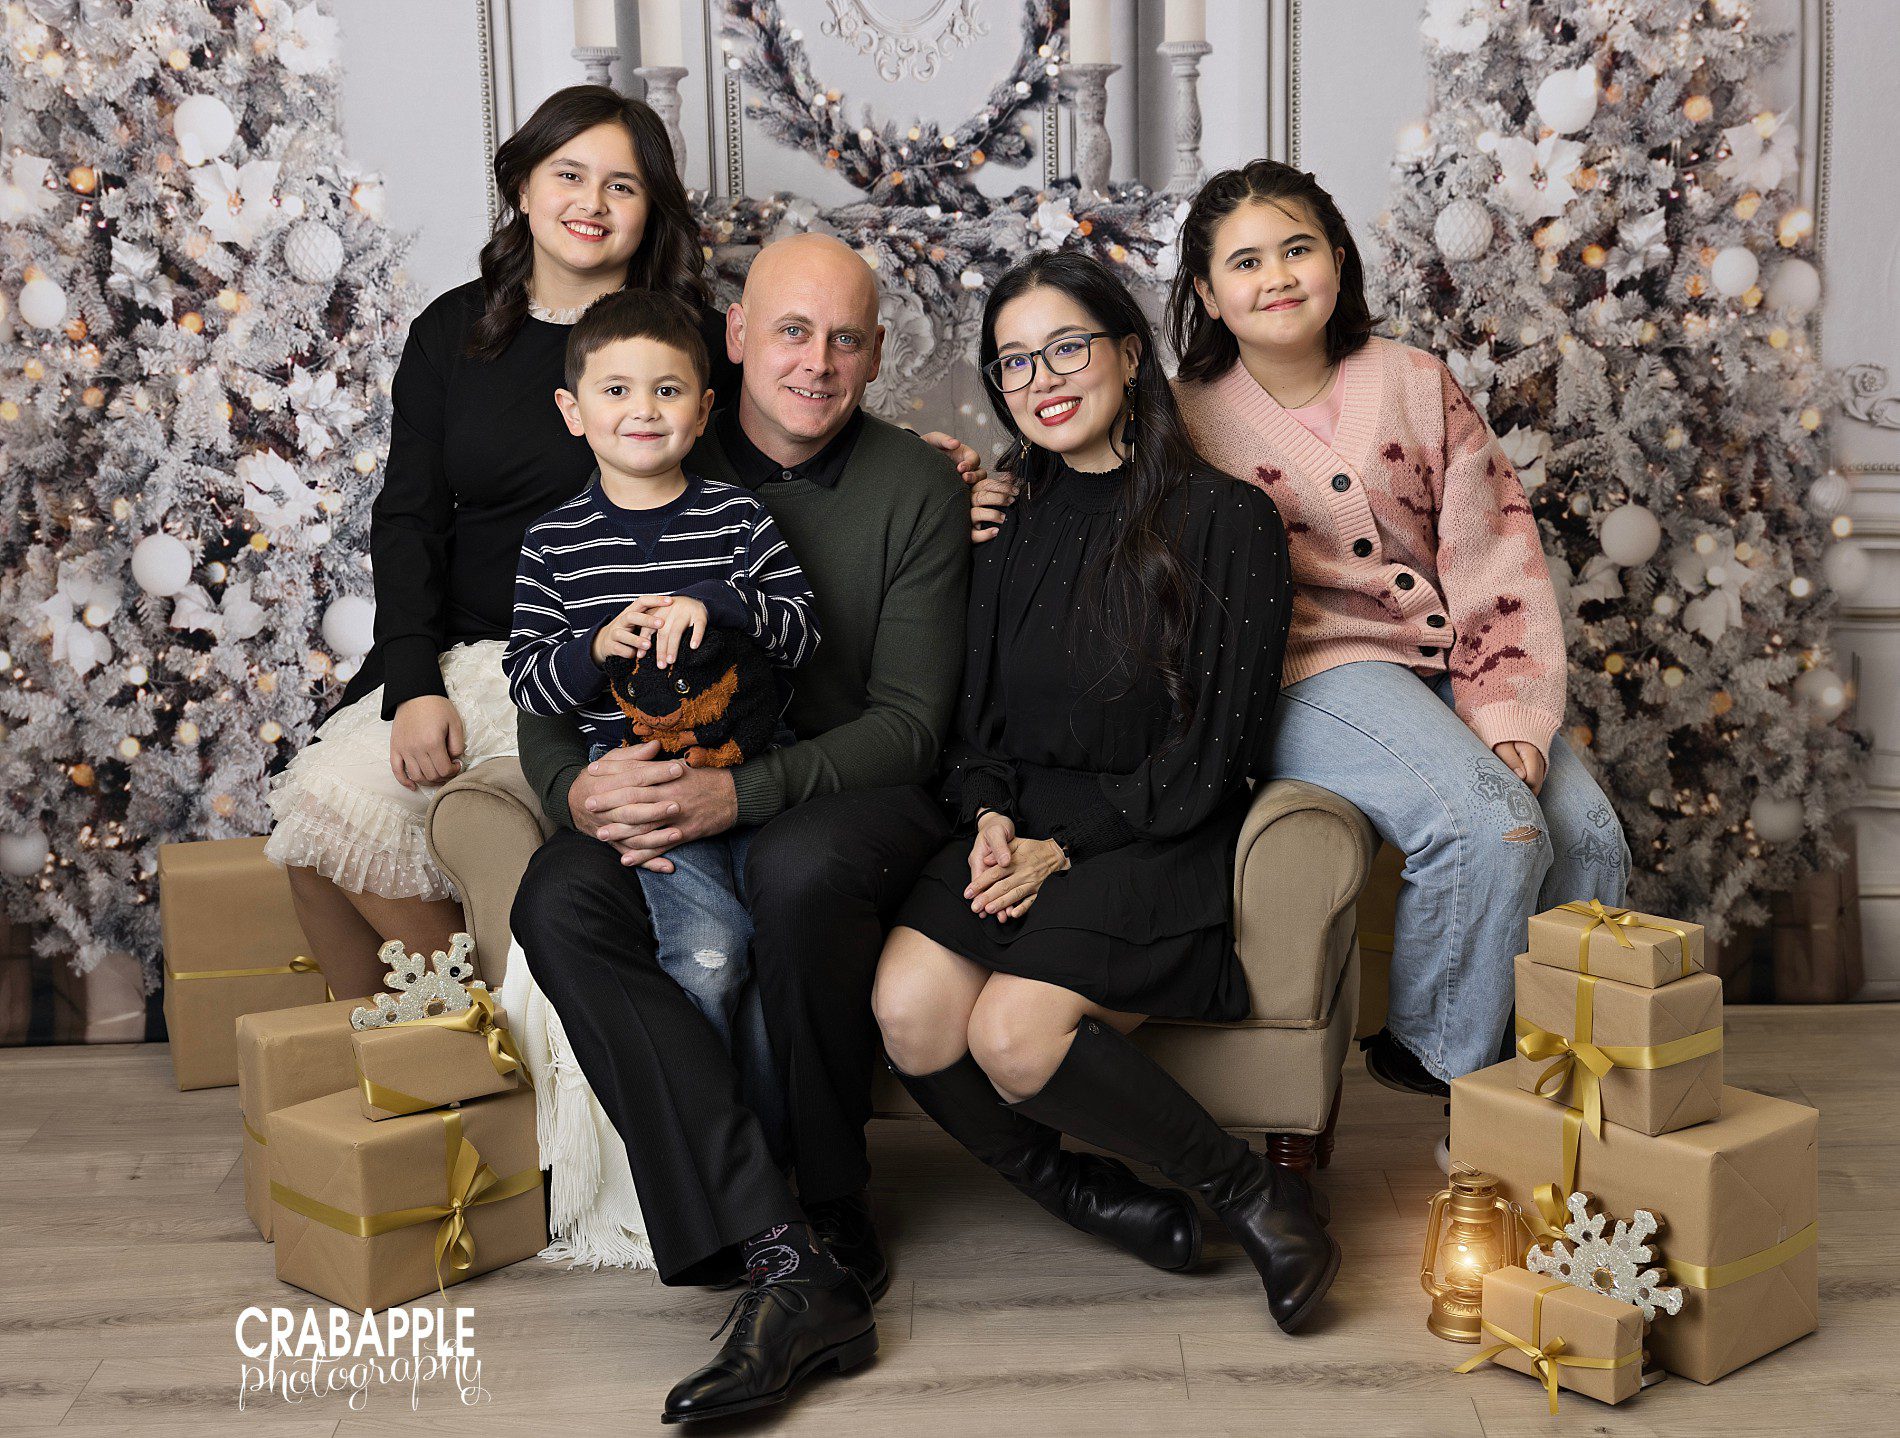 photo ideas for families for christmas cards